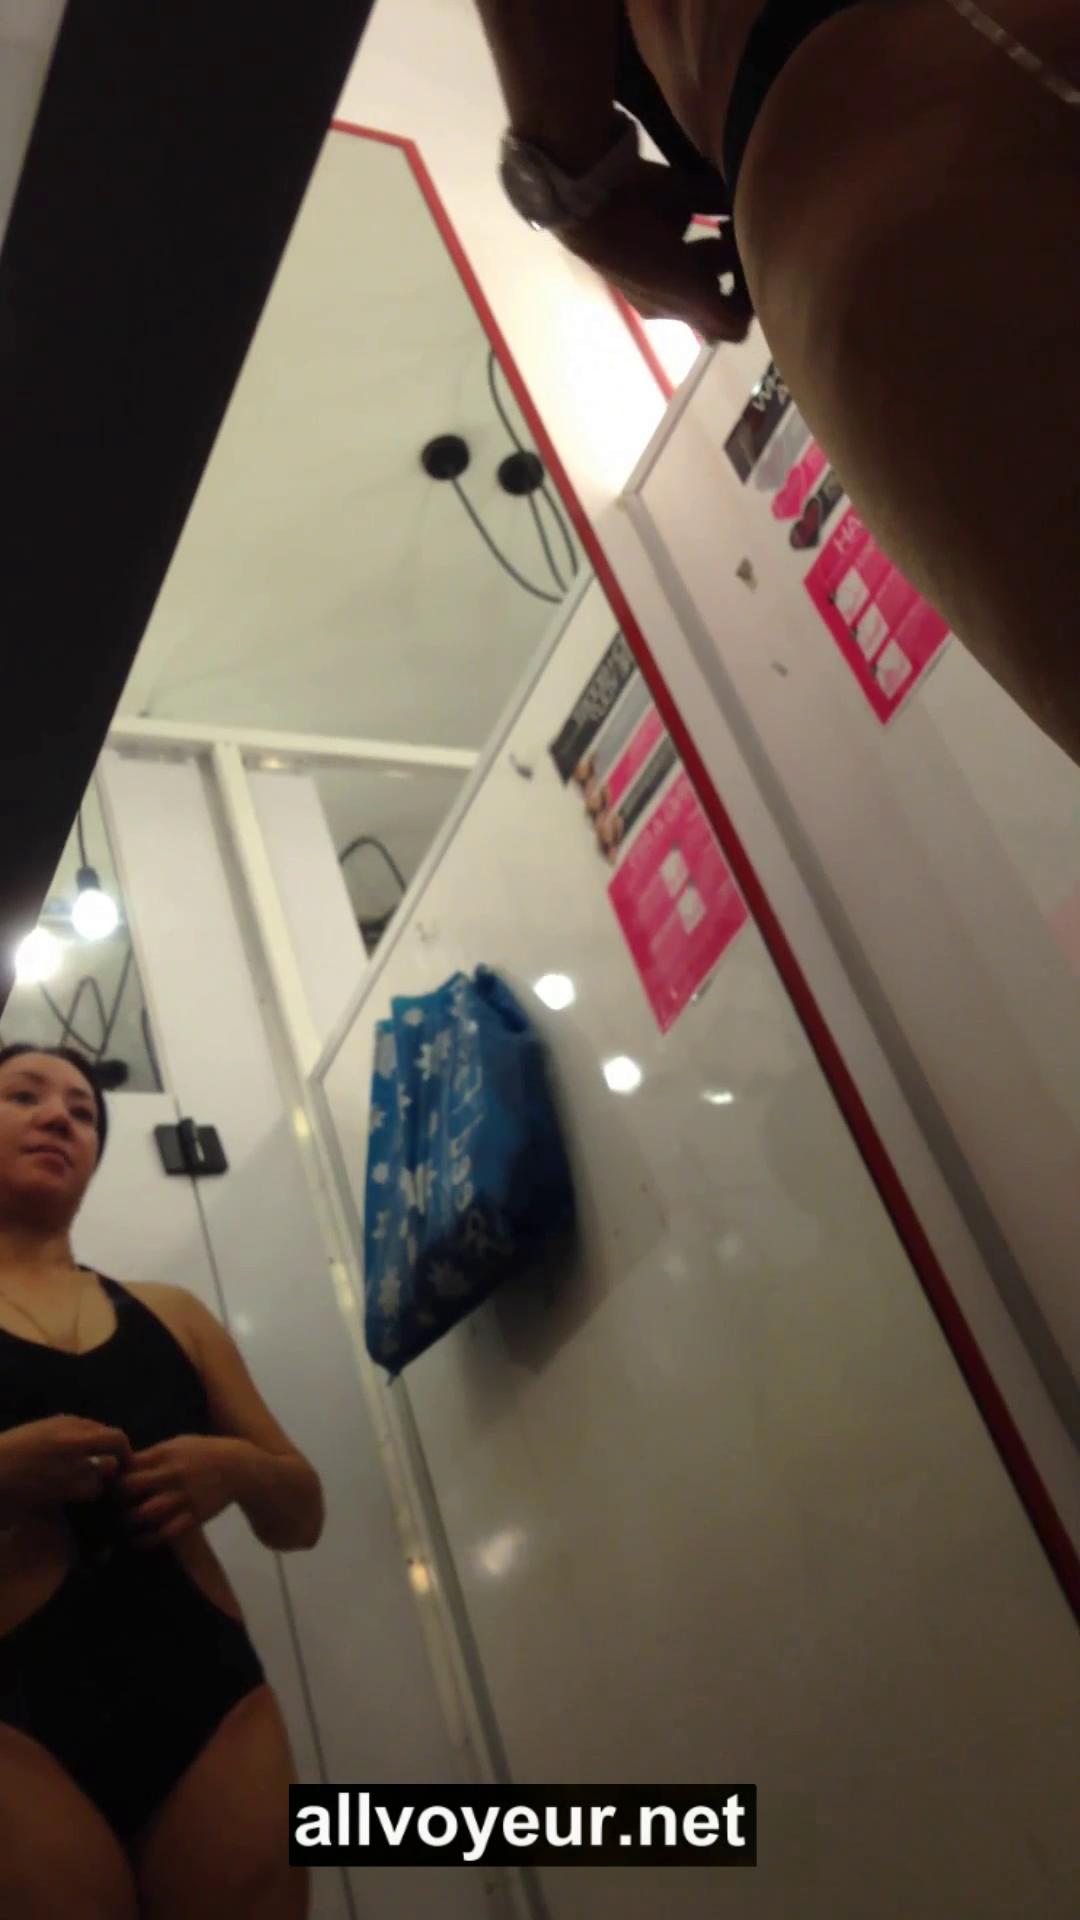 indonesian voyeur changing room Sex Images Hq